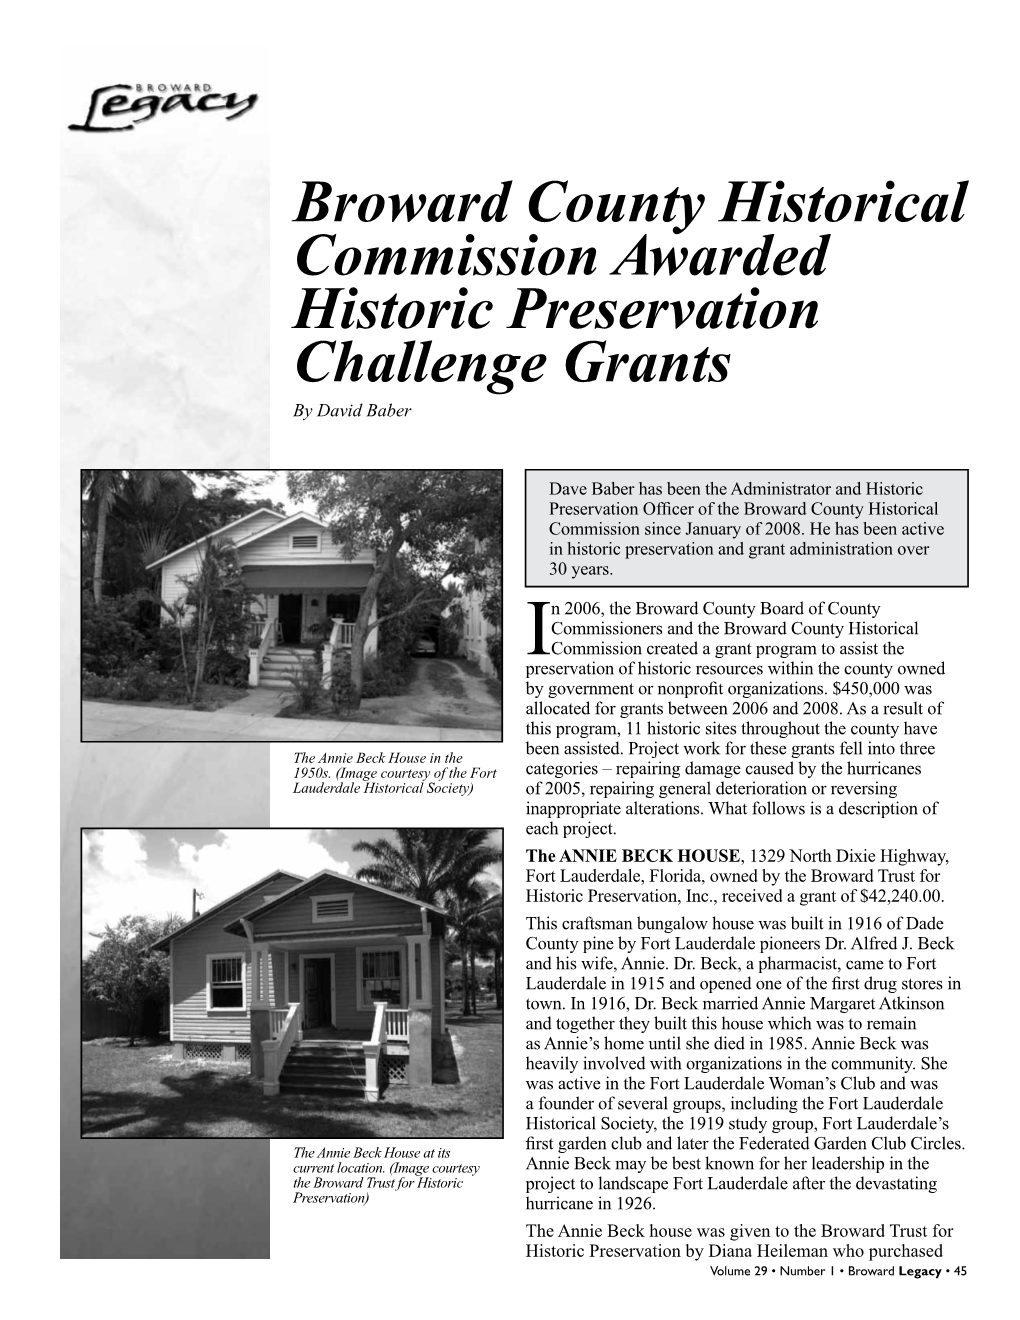 Broward County Historical Commission Awarded Historic Preservation Challenge Grants by David Baber